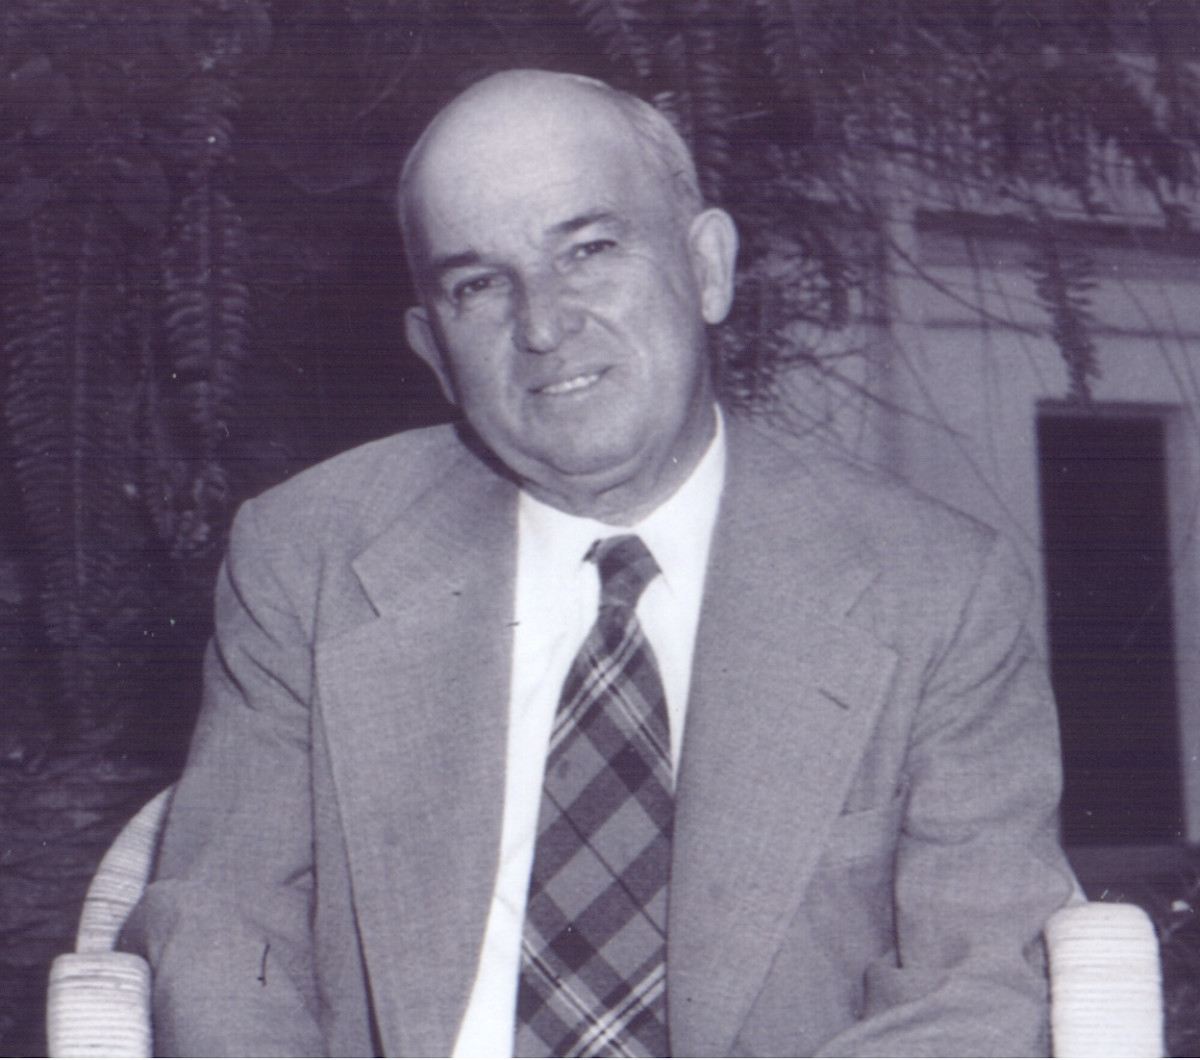 William P. Bell was one of 14 charter members of the American Society of Golf Course Architects, which was formed in 1947.